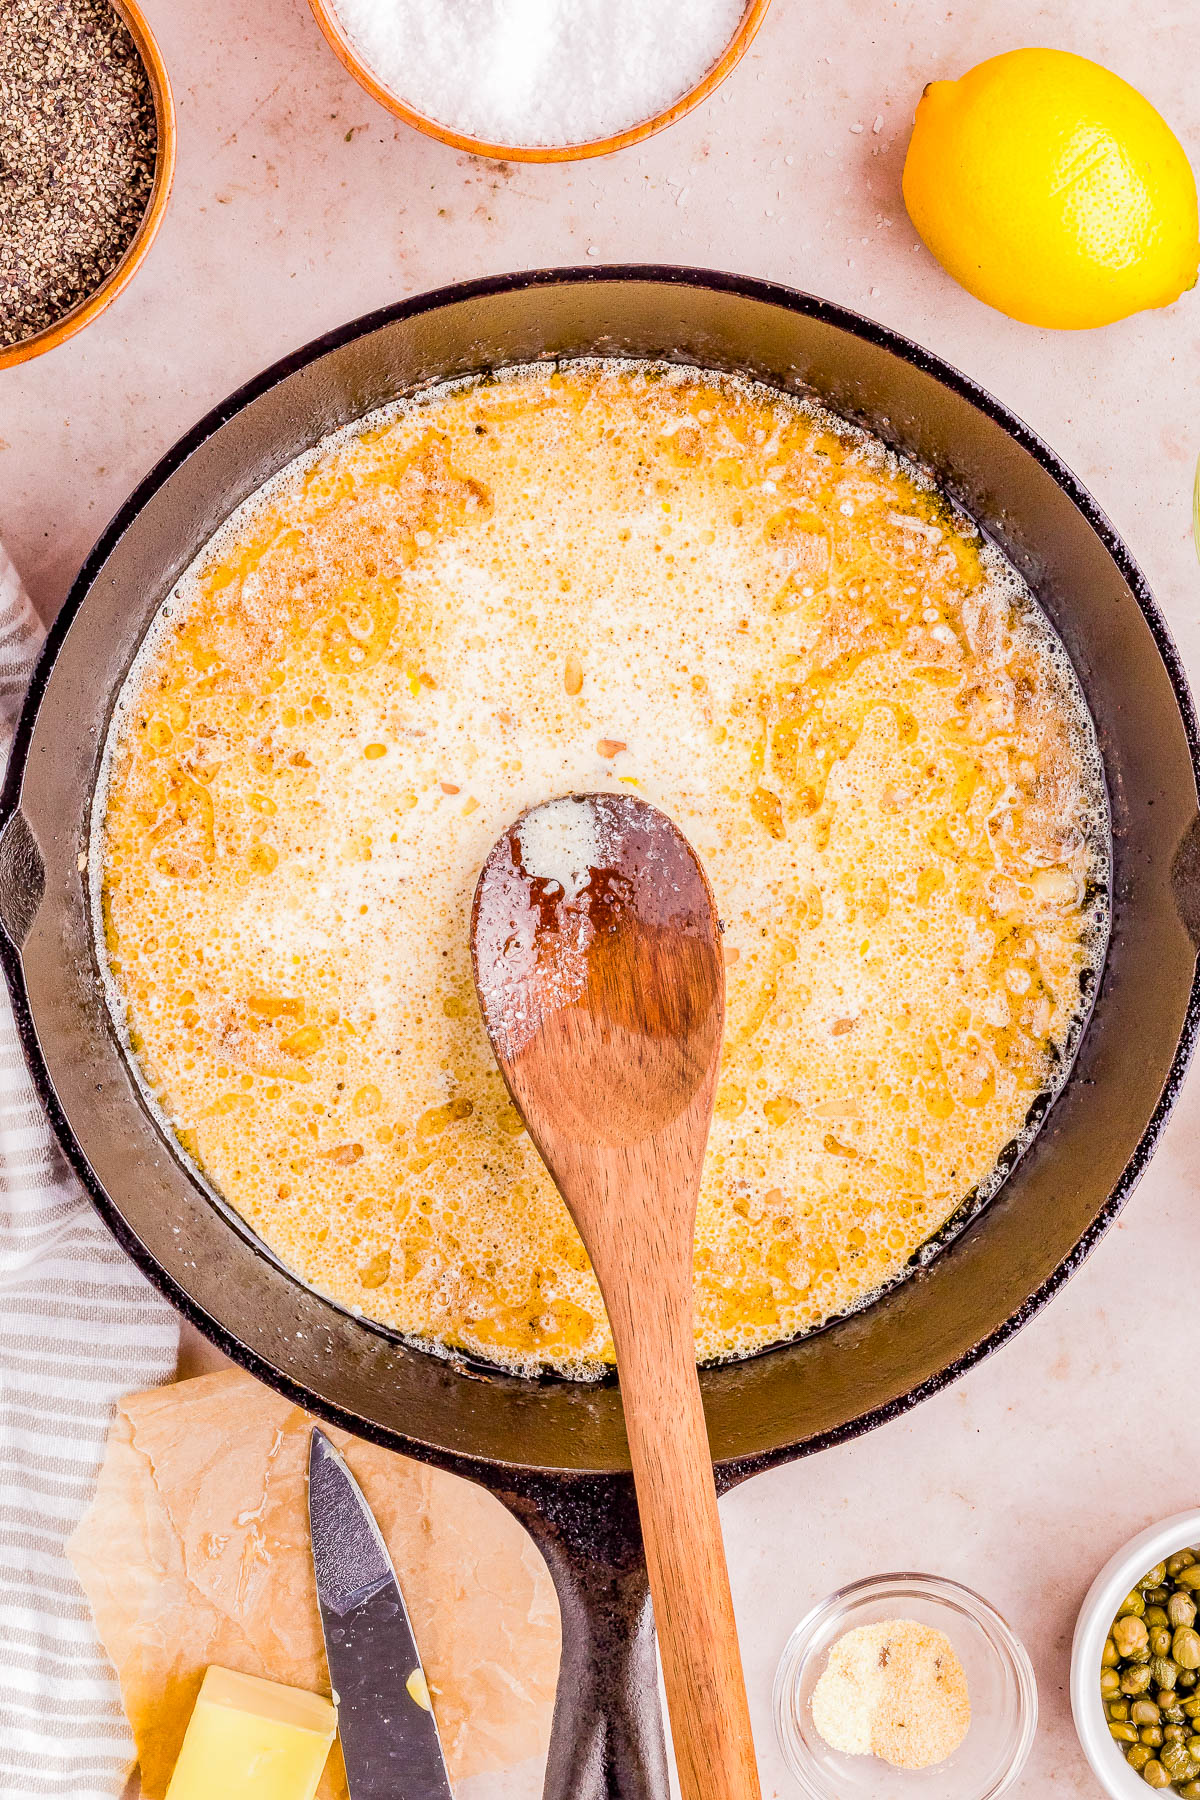 Butter melting in a cast iron skillet surrounded by cooking ingredients.